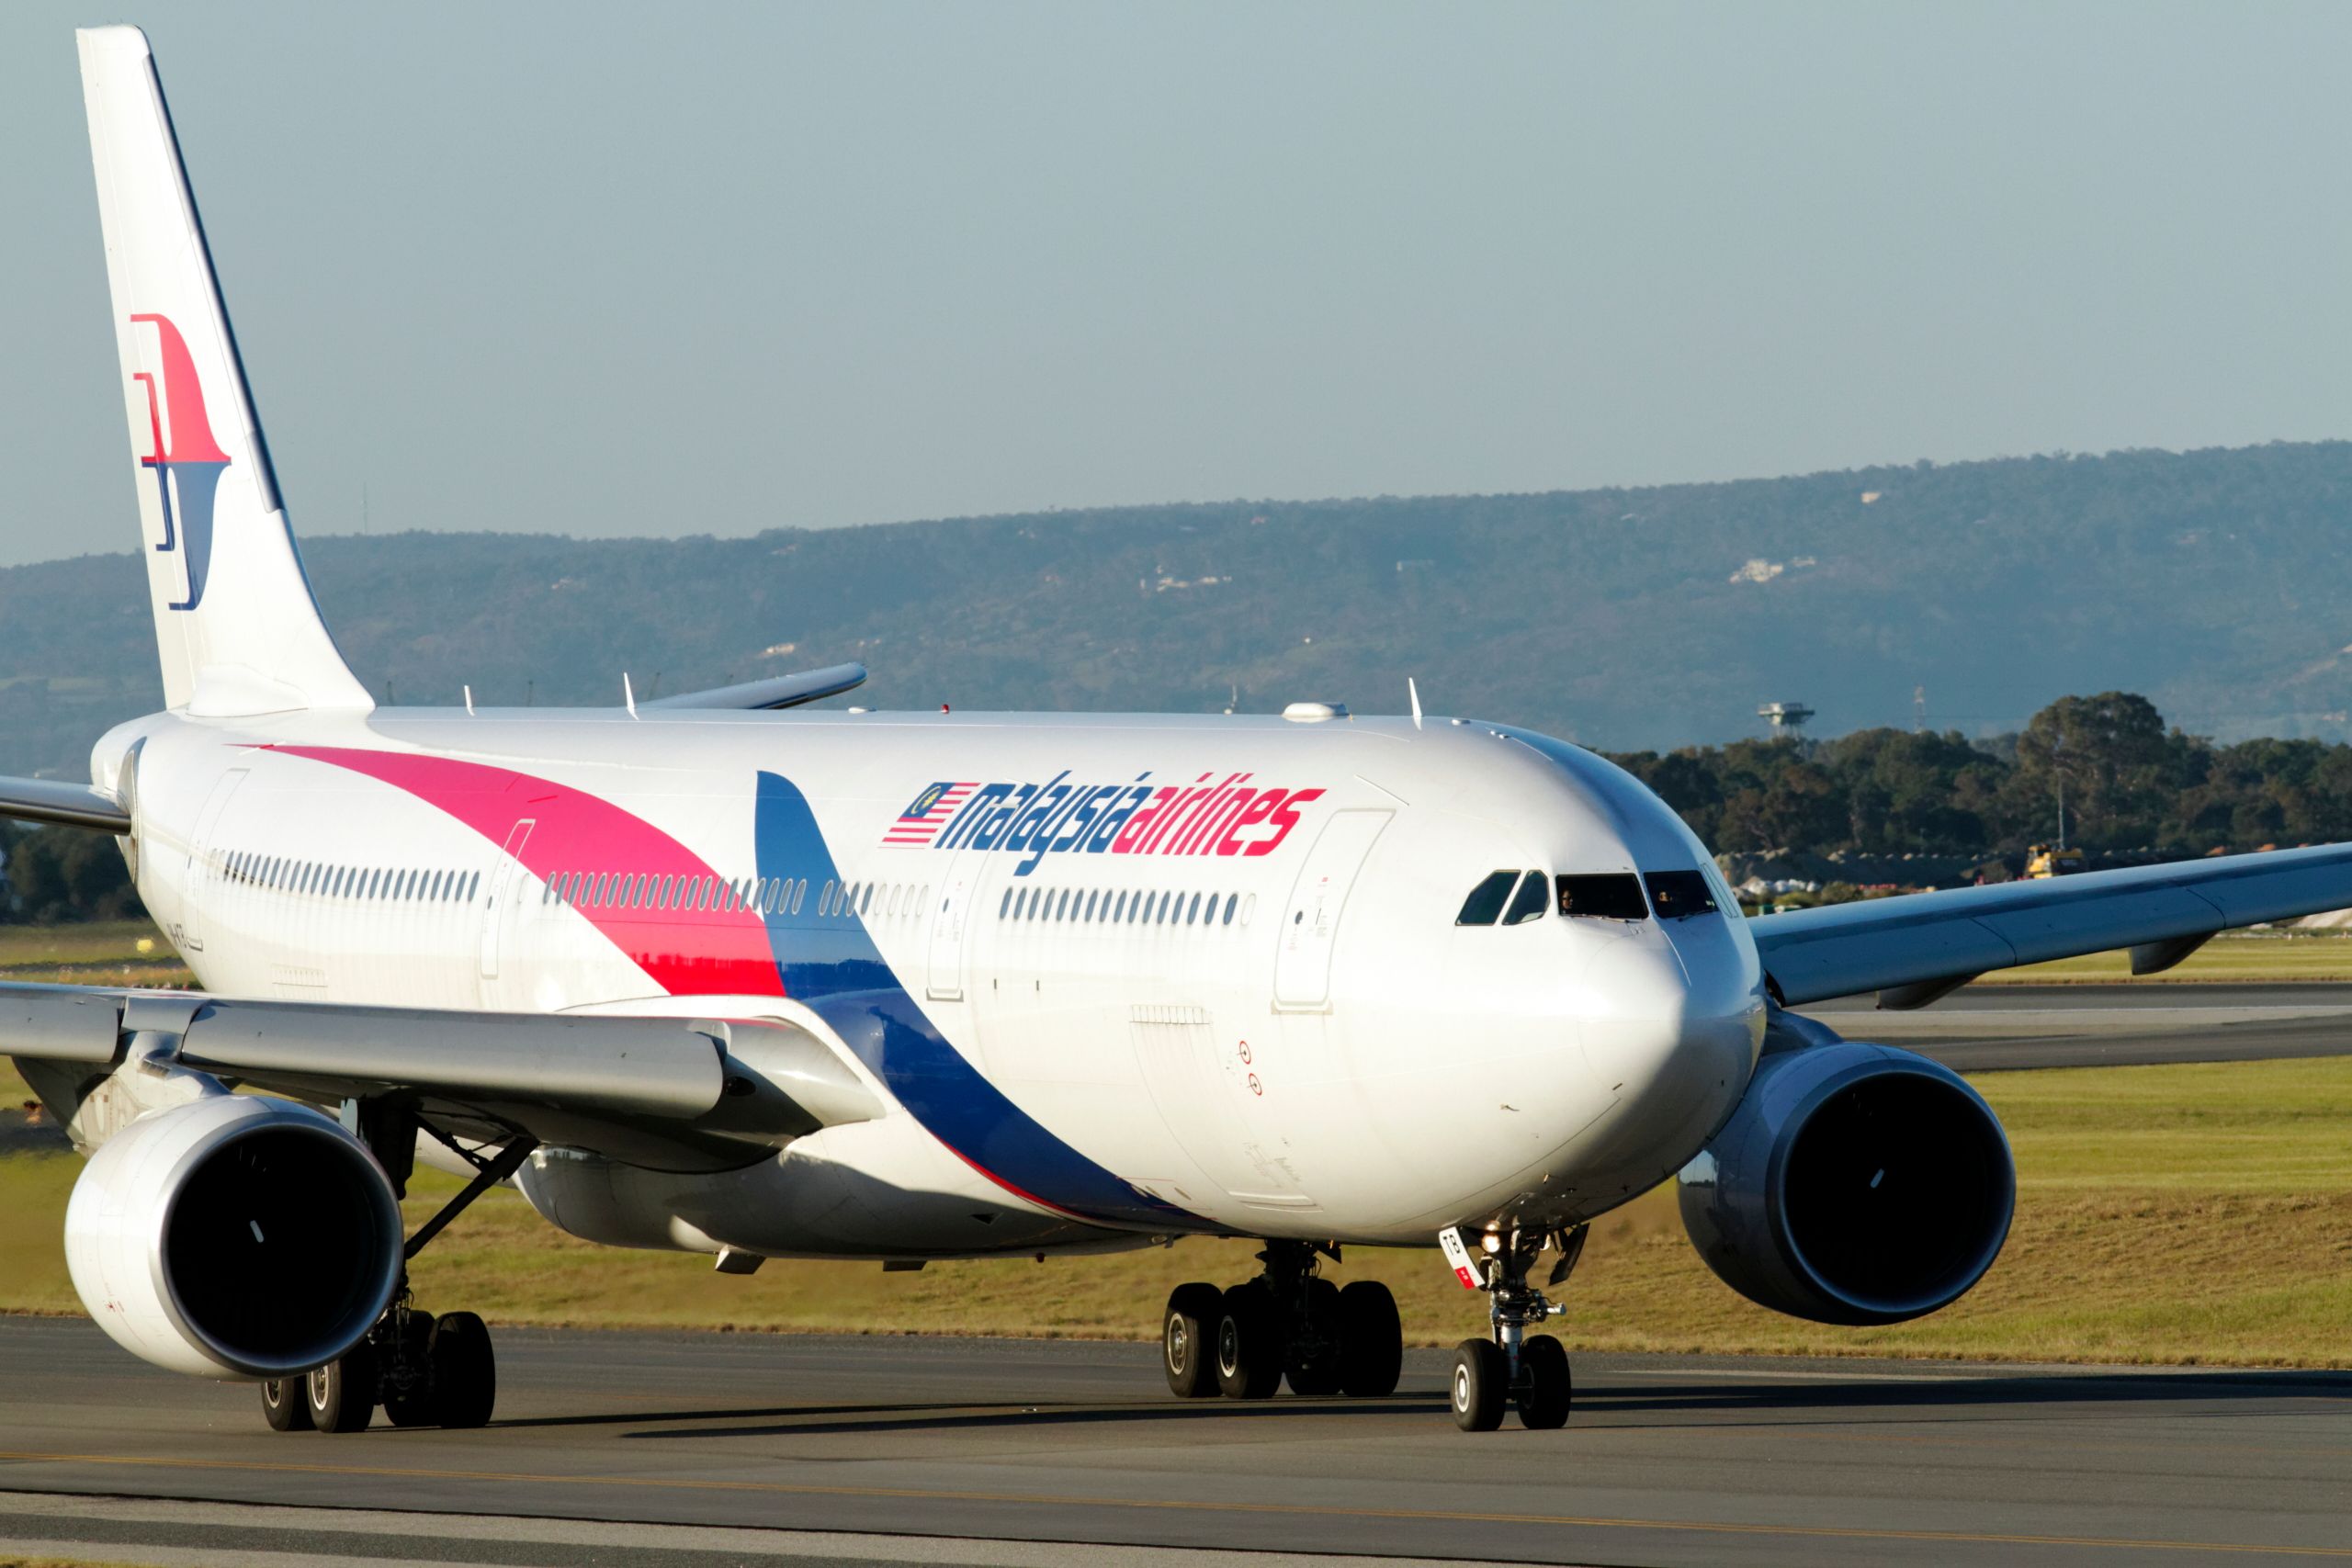 Malaysia Airlines Airbus A330